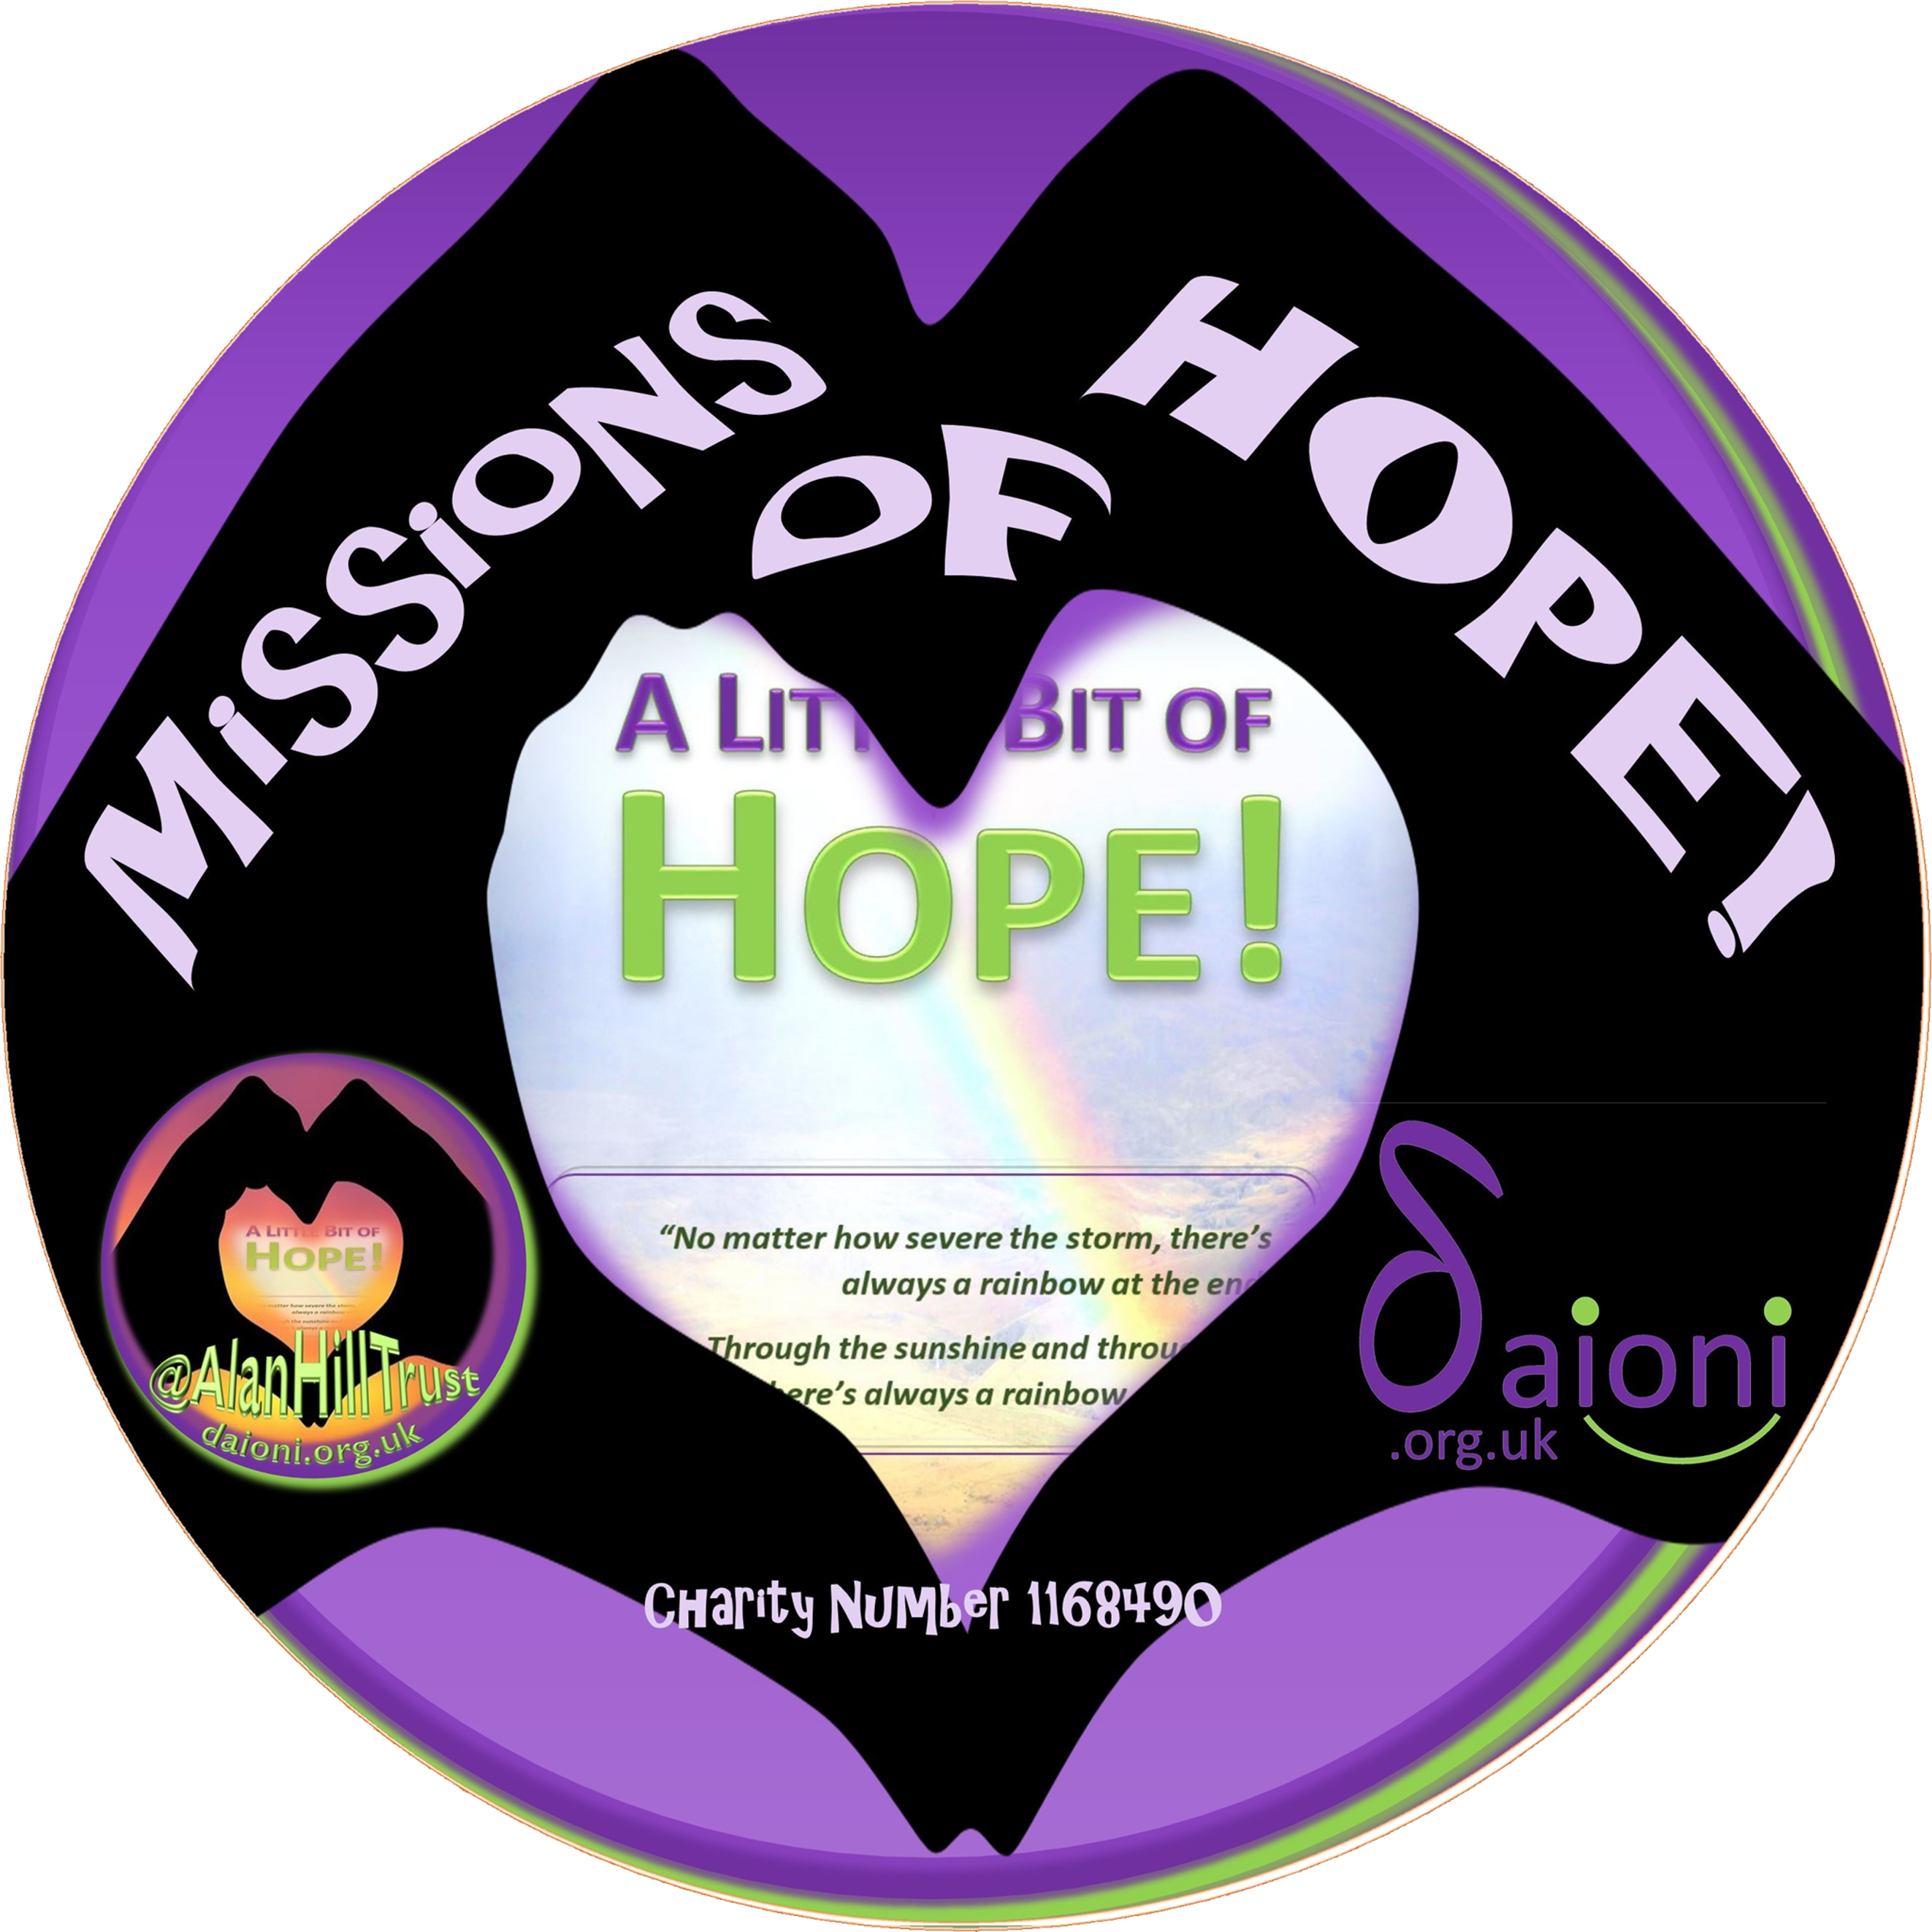 Missions of Hope logo